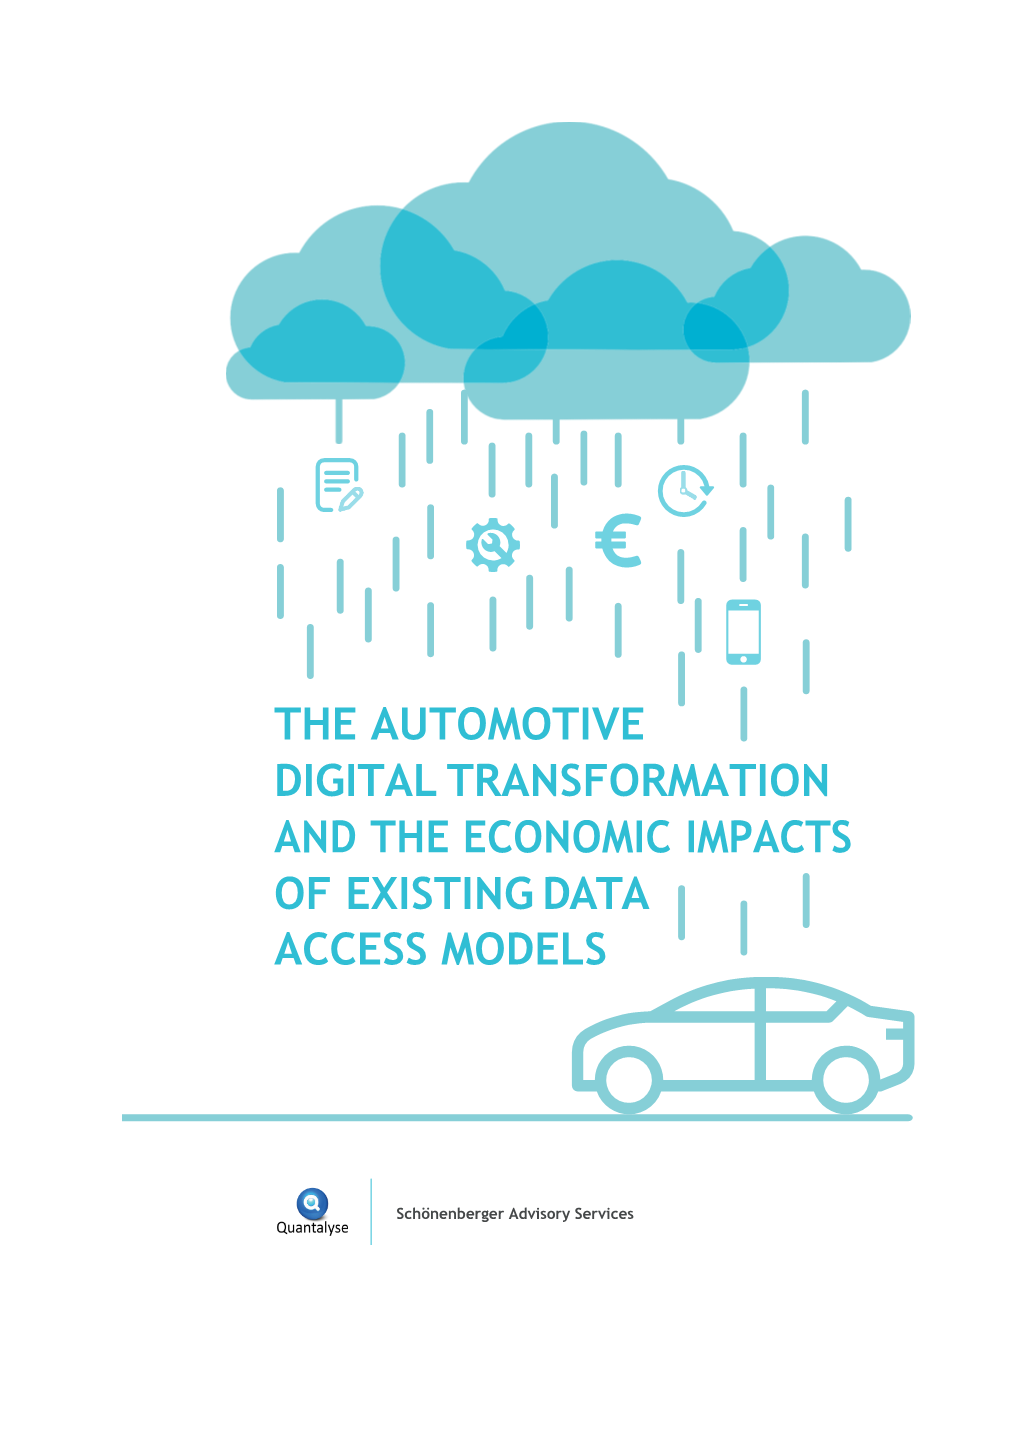 The Automotive Digital Transformation and the Economic Impacts of Existing Data Access Models